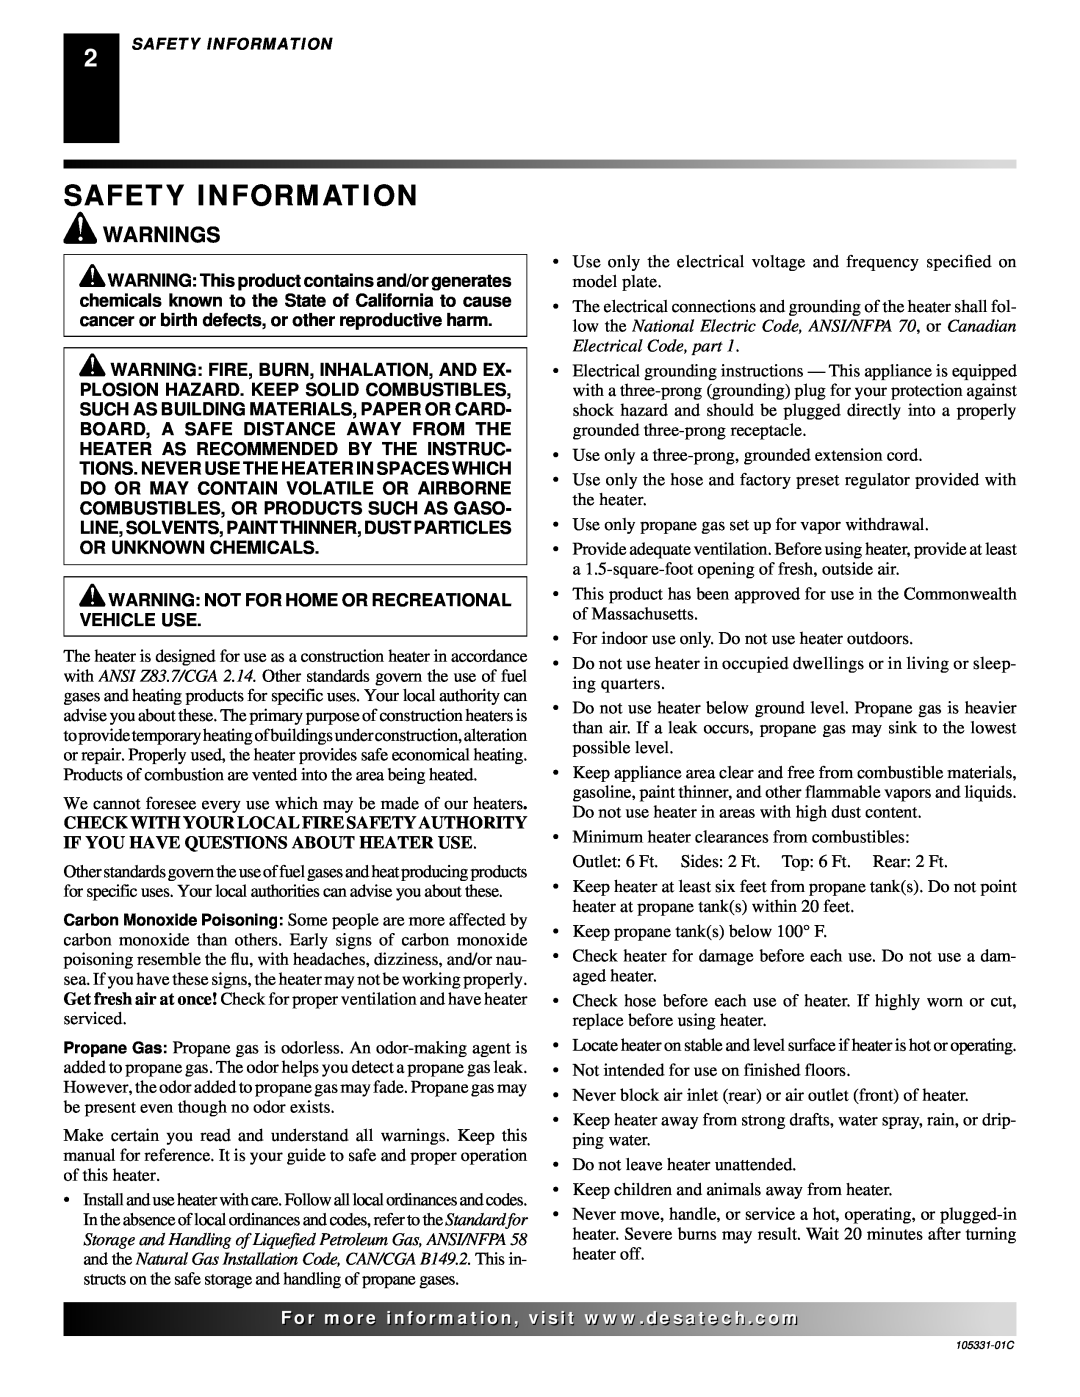 Desa ROPANE CONSTRUCTION HEATER owner manual Safety Information, Warnings, Warning Not For Home Or Recreational Vehicle Use 